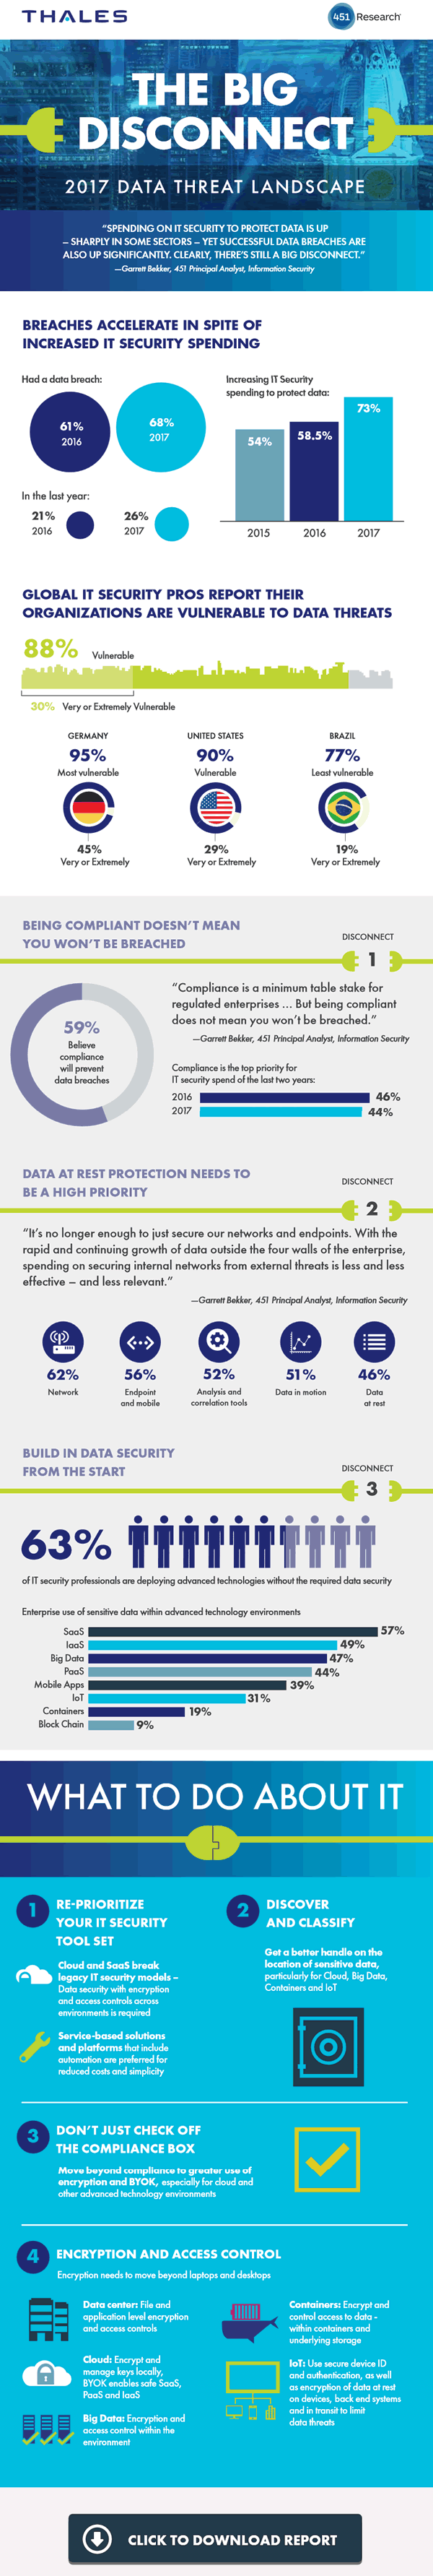 2017 Data Threat Landscape infographic - click for full version - get the report